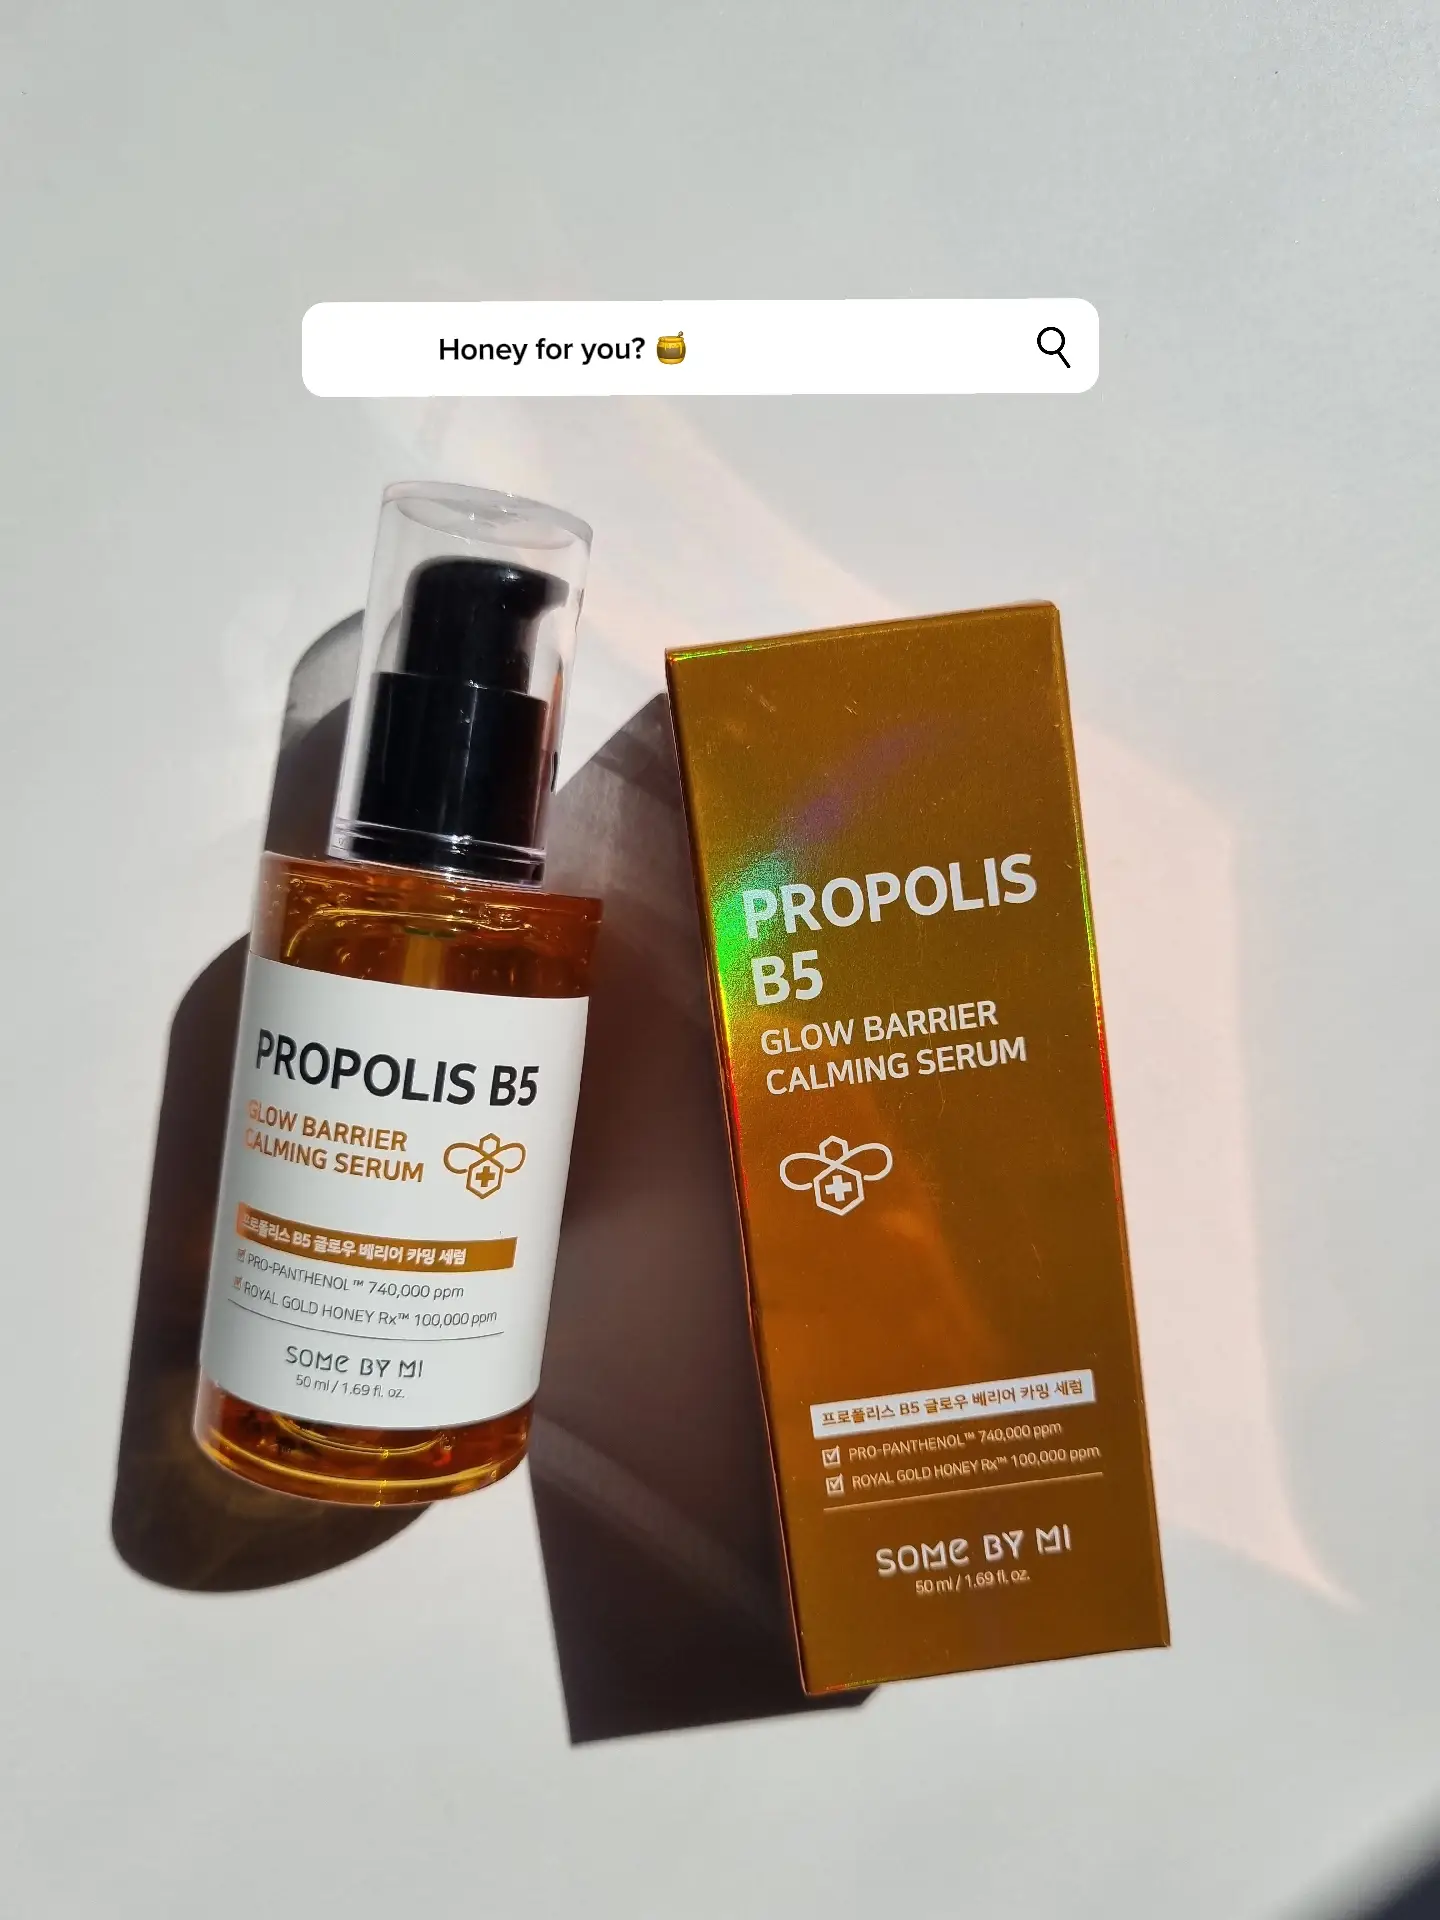  SOME BY MI Propolis B5 Glow Barrier Calming Mask - 3.52Oz,  100g - Made from Panthenol and Honey Extracts for Sensitive Skin - Calming  Effect and Strengthen Skin Barrier 